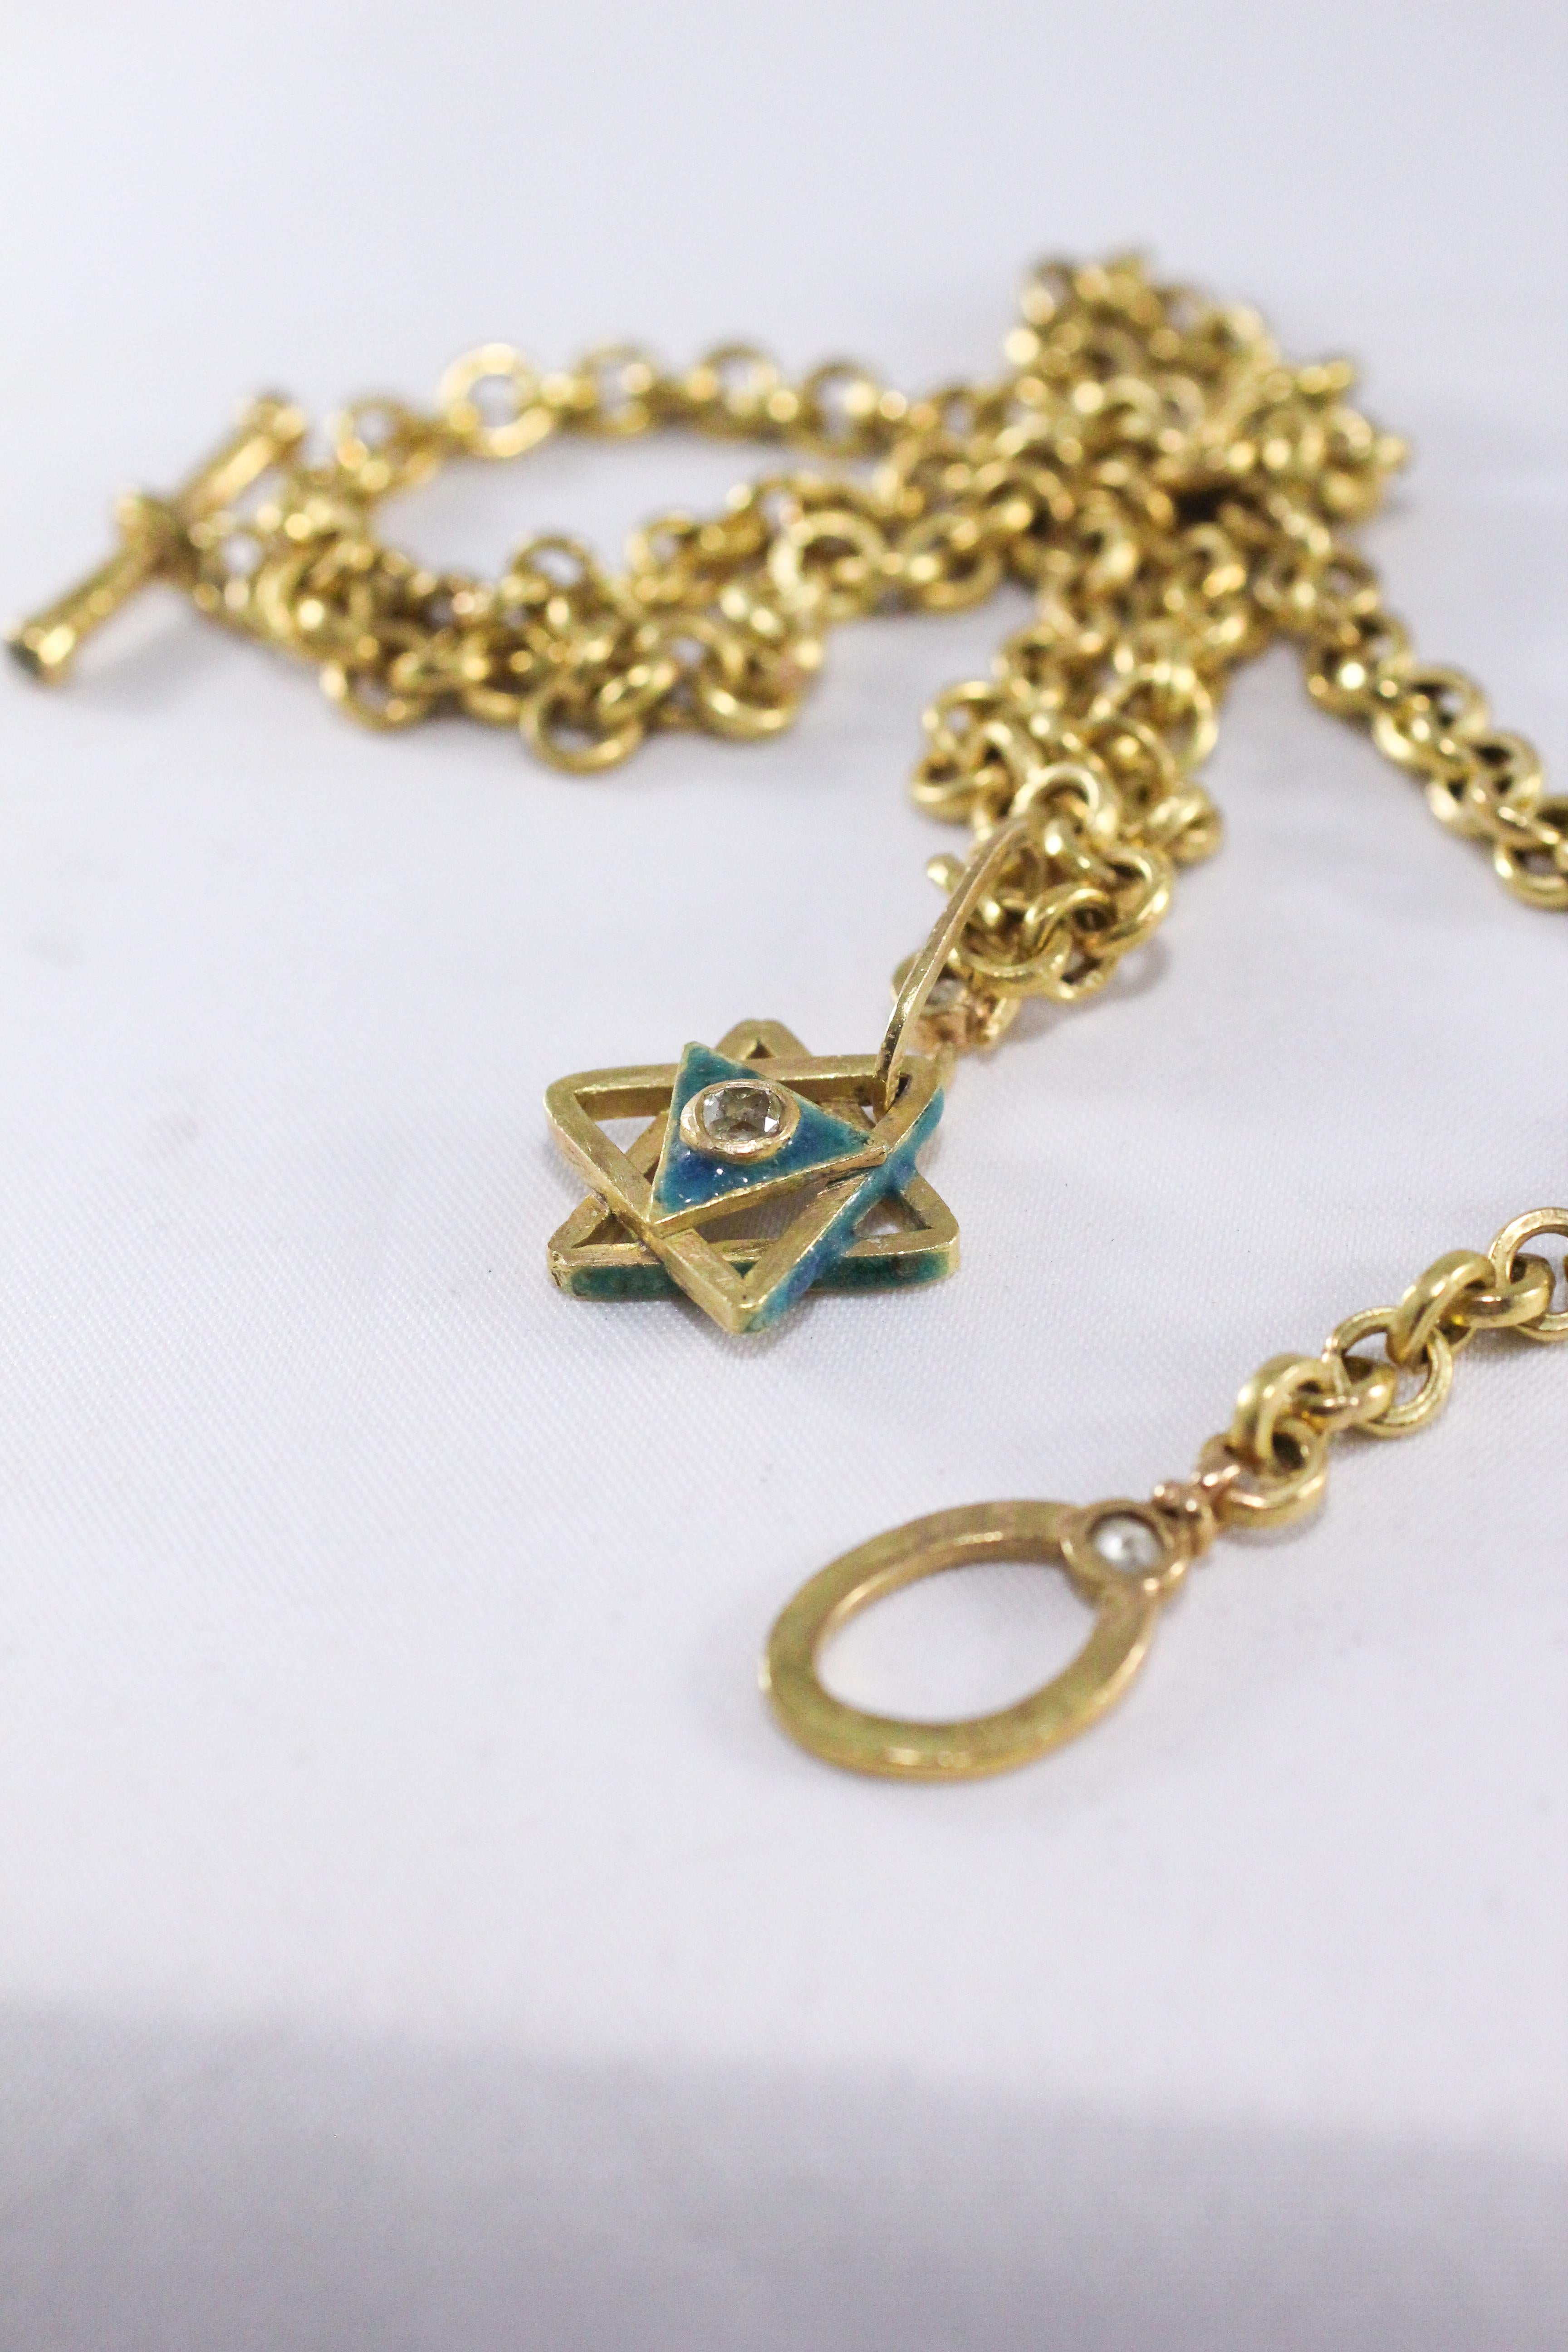 Enamel Magen David 18K Gold Chain Necklace Diamond Enhancer and Toggle Clasp For Sale 7